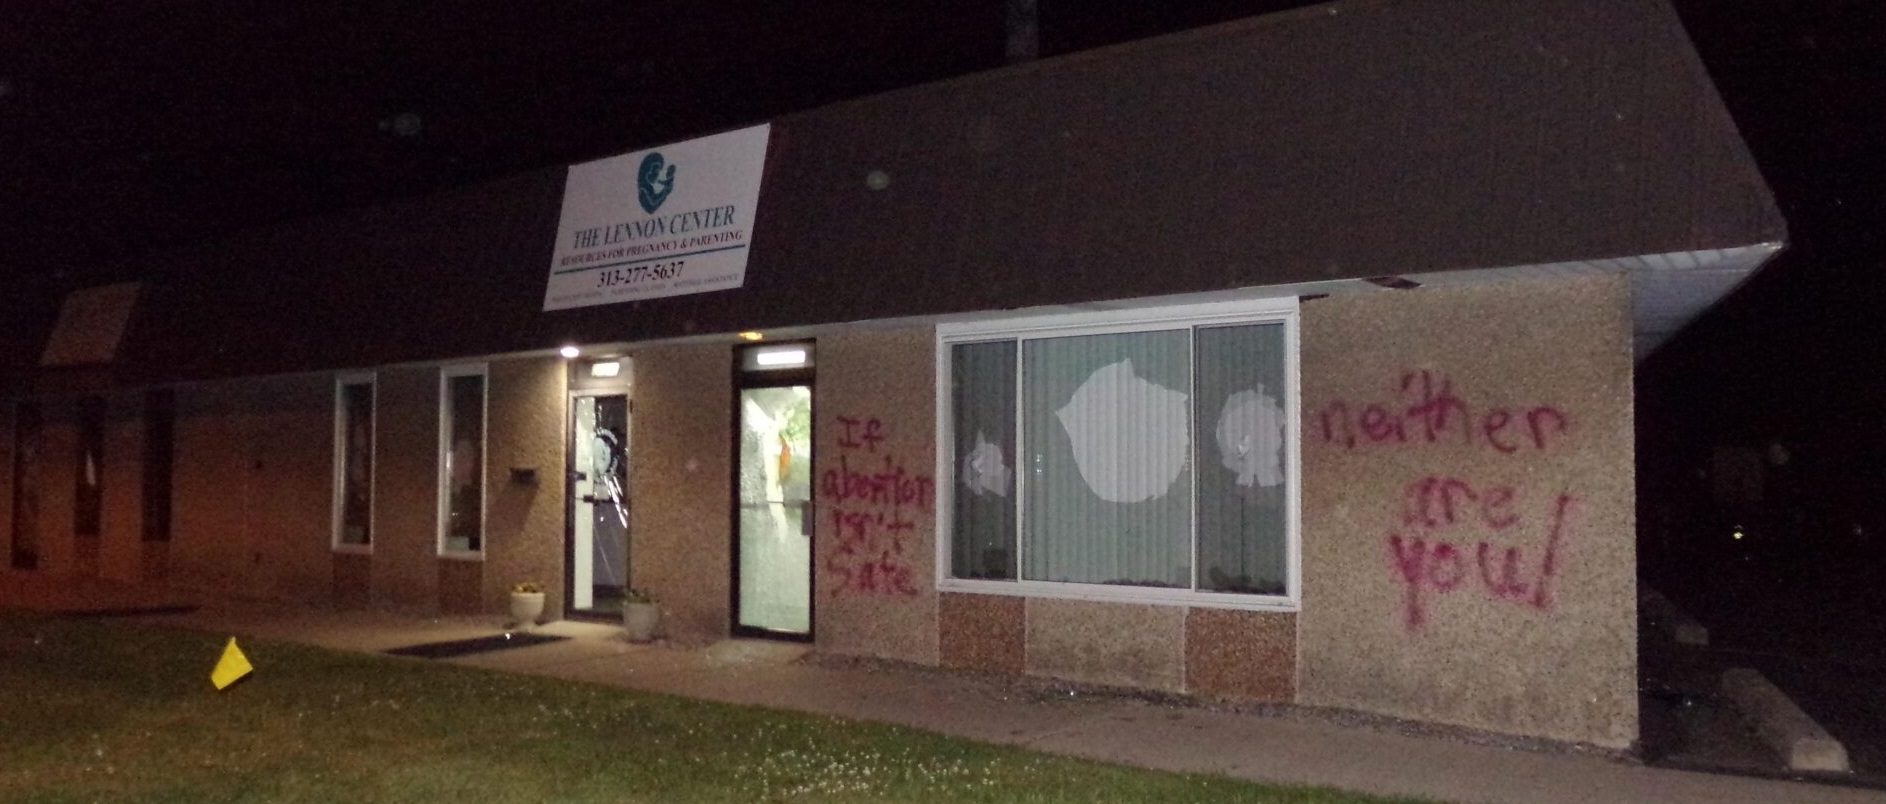 Pro-abortion terrorist group claims to have attacked two Detroit-area pregnancy centers